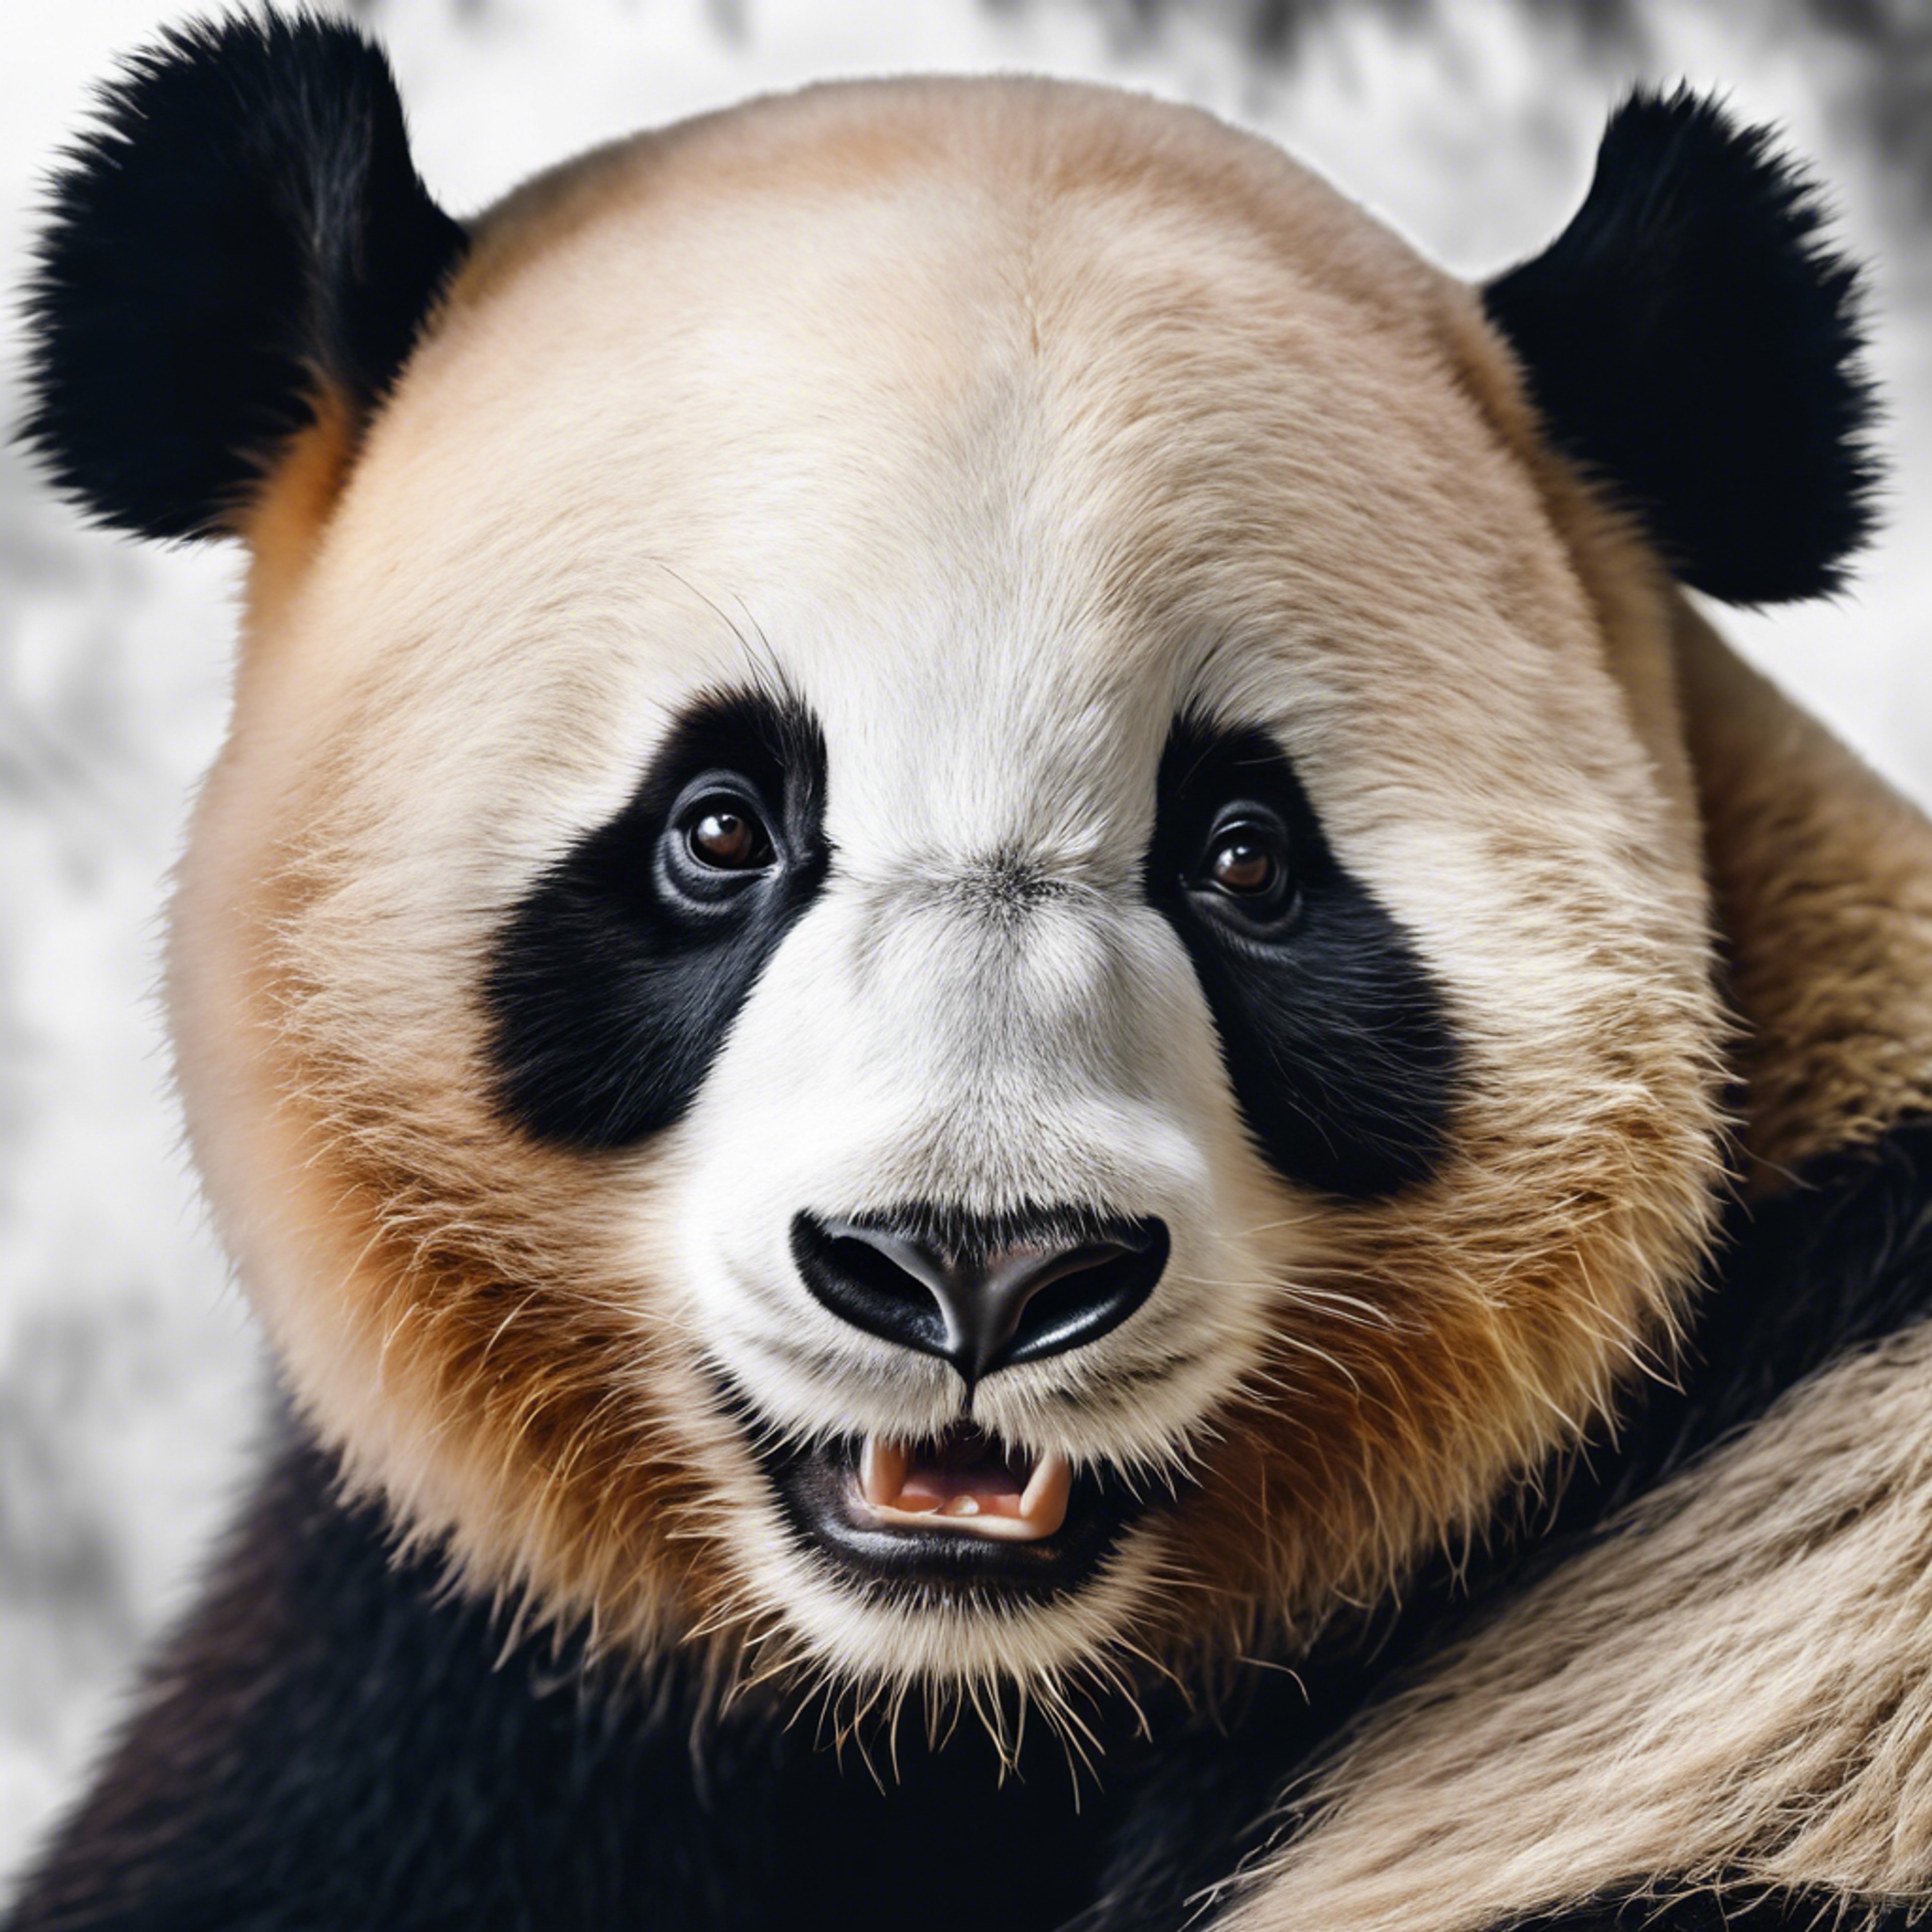 A close-up portrait of a smiling panda, showcasing the joy and charm of this magnificent creature. کاغذ دیواری[5b22781787714e61bfbc]